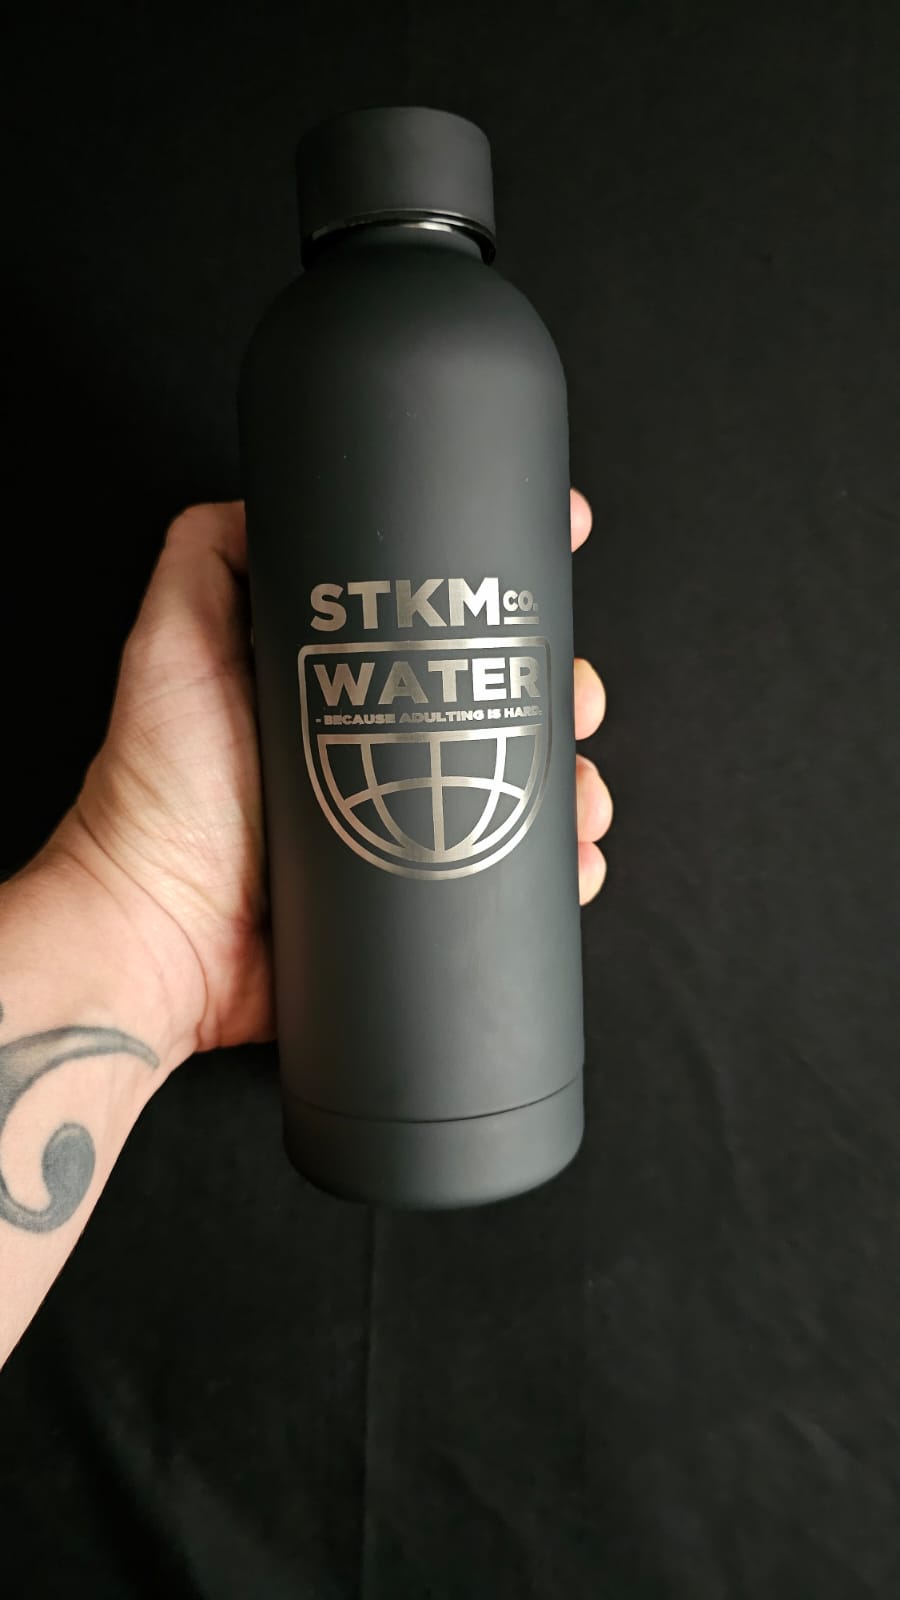 Termo STKM CO WATER 17oz MATE